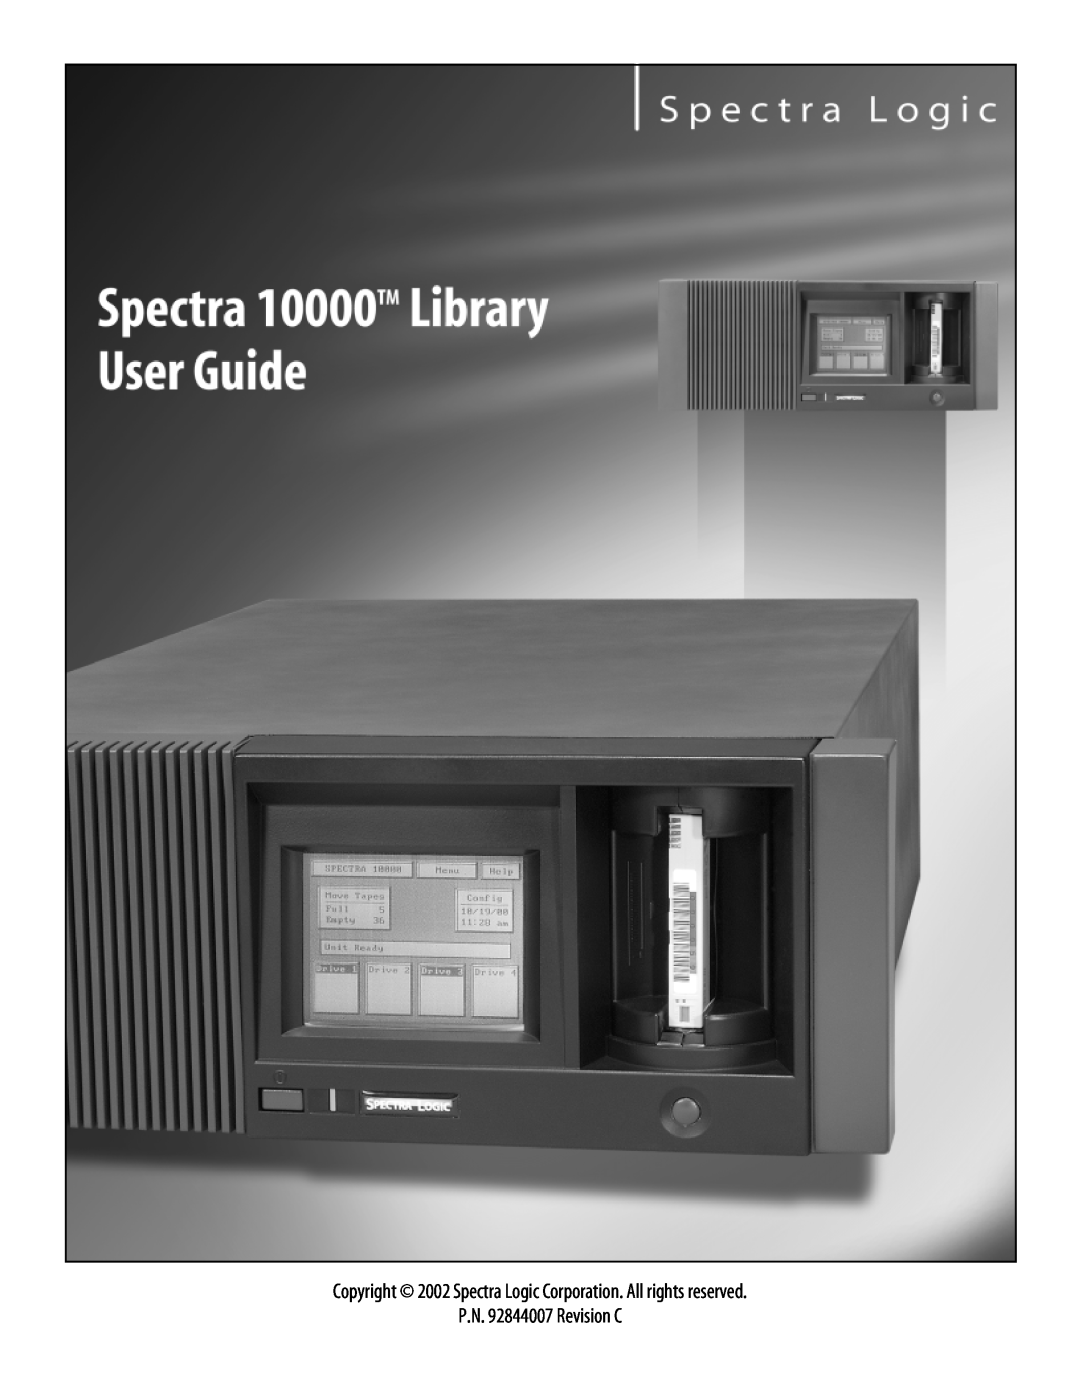 Spectra Logic 10000 manual Copyright 2002 Spectra Logic Corporation. All rights reserved, P.N. 92844007 Revision C 